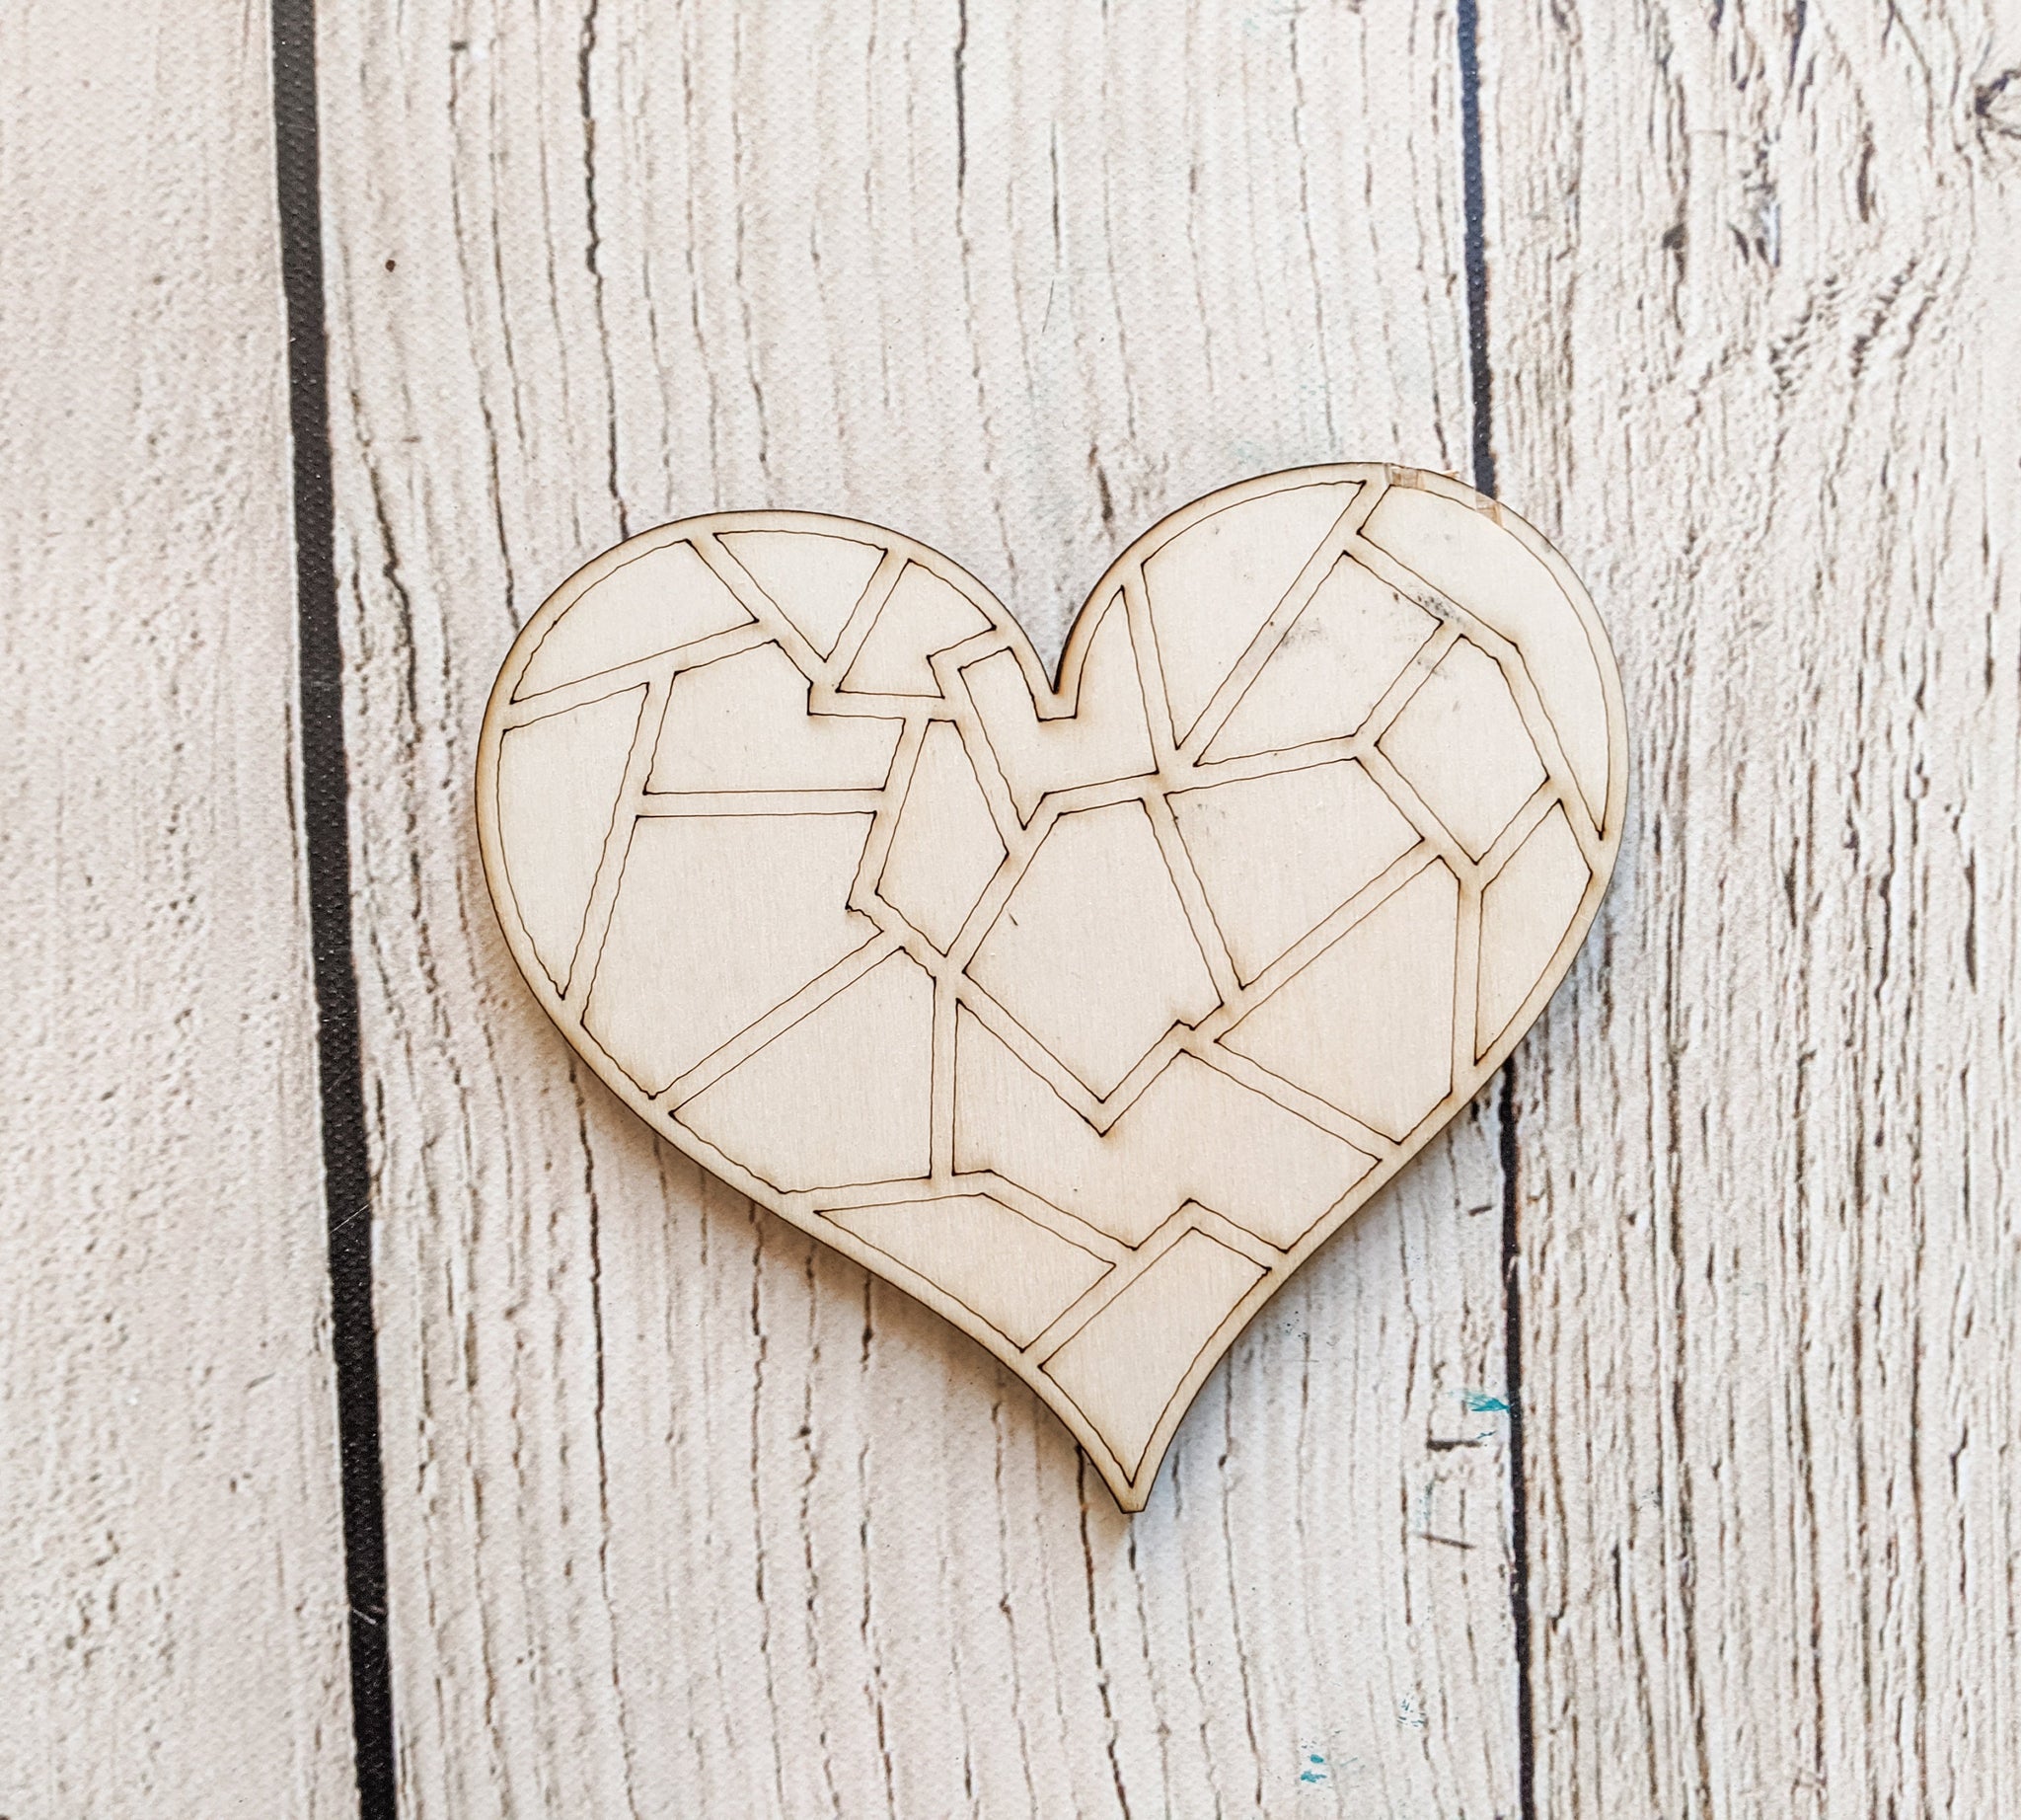 Geometrical Heart Shape, 3 inches, 1/4 Baltic Birch, Laser Cut unfinished wood blank